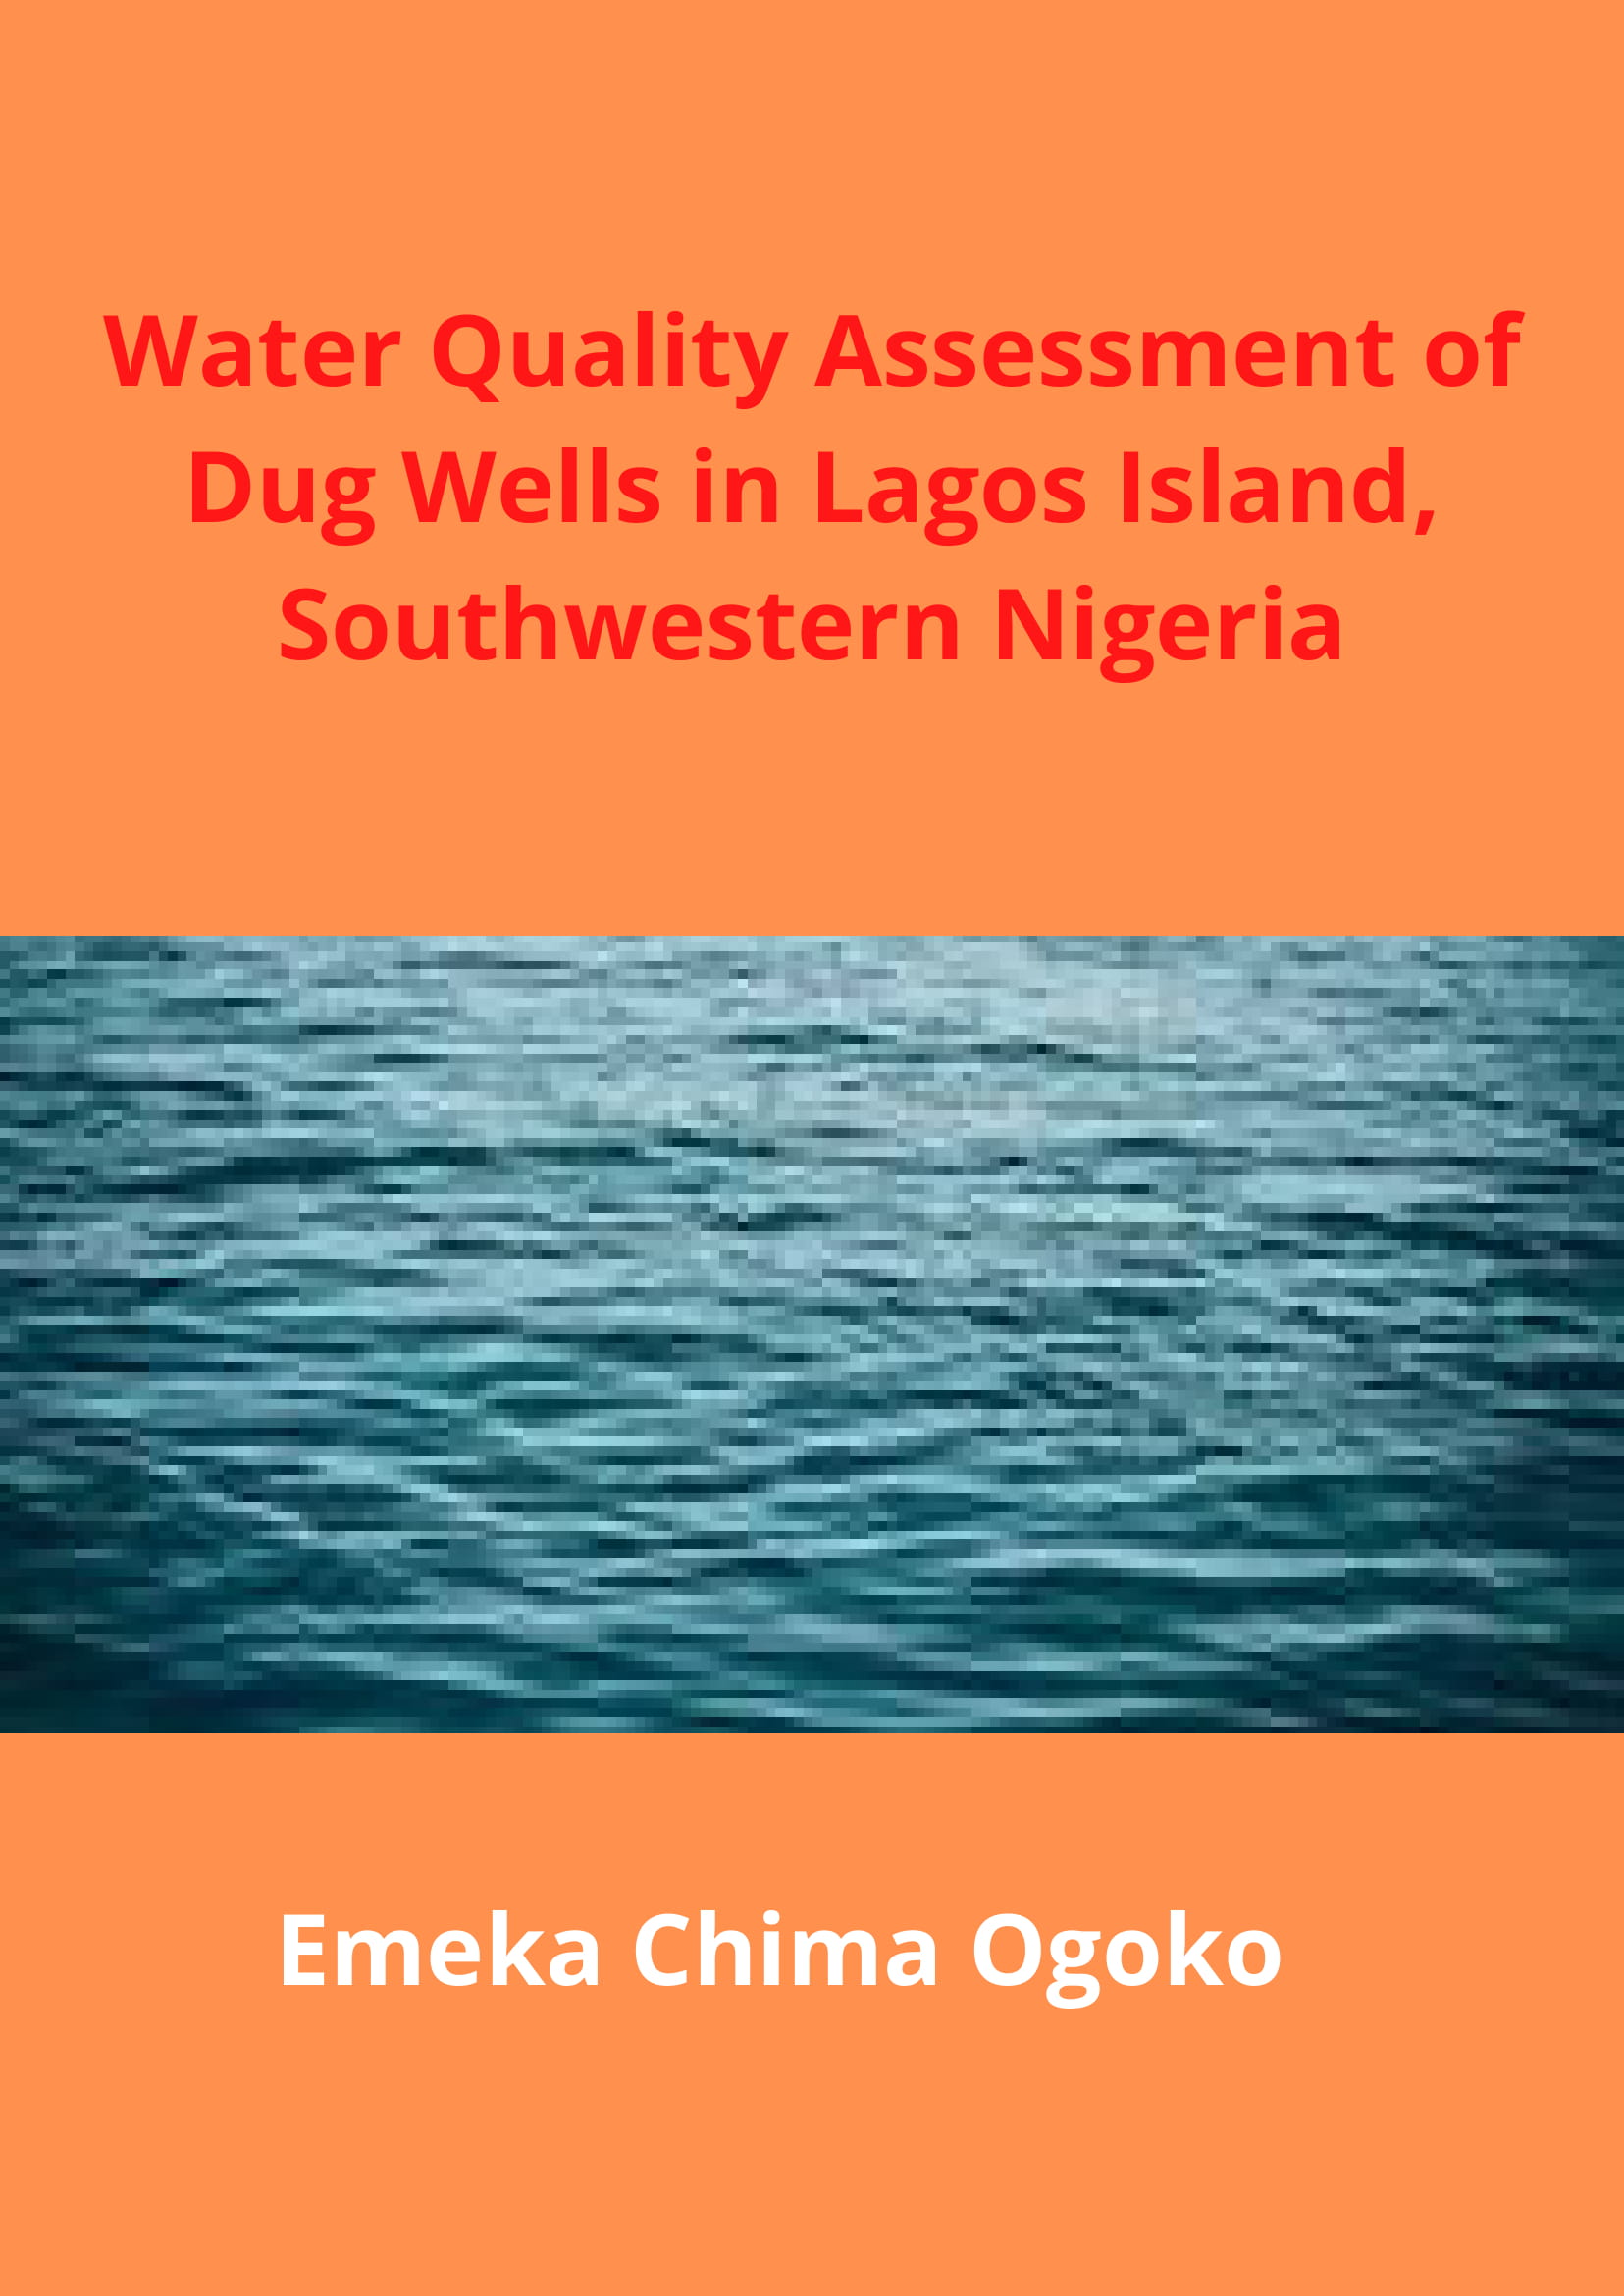 Water Quality Assessment of Dug Wells in Lagos Island SotheWestern Nigeria